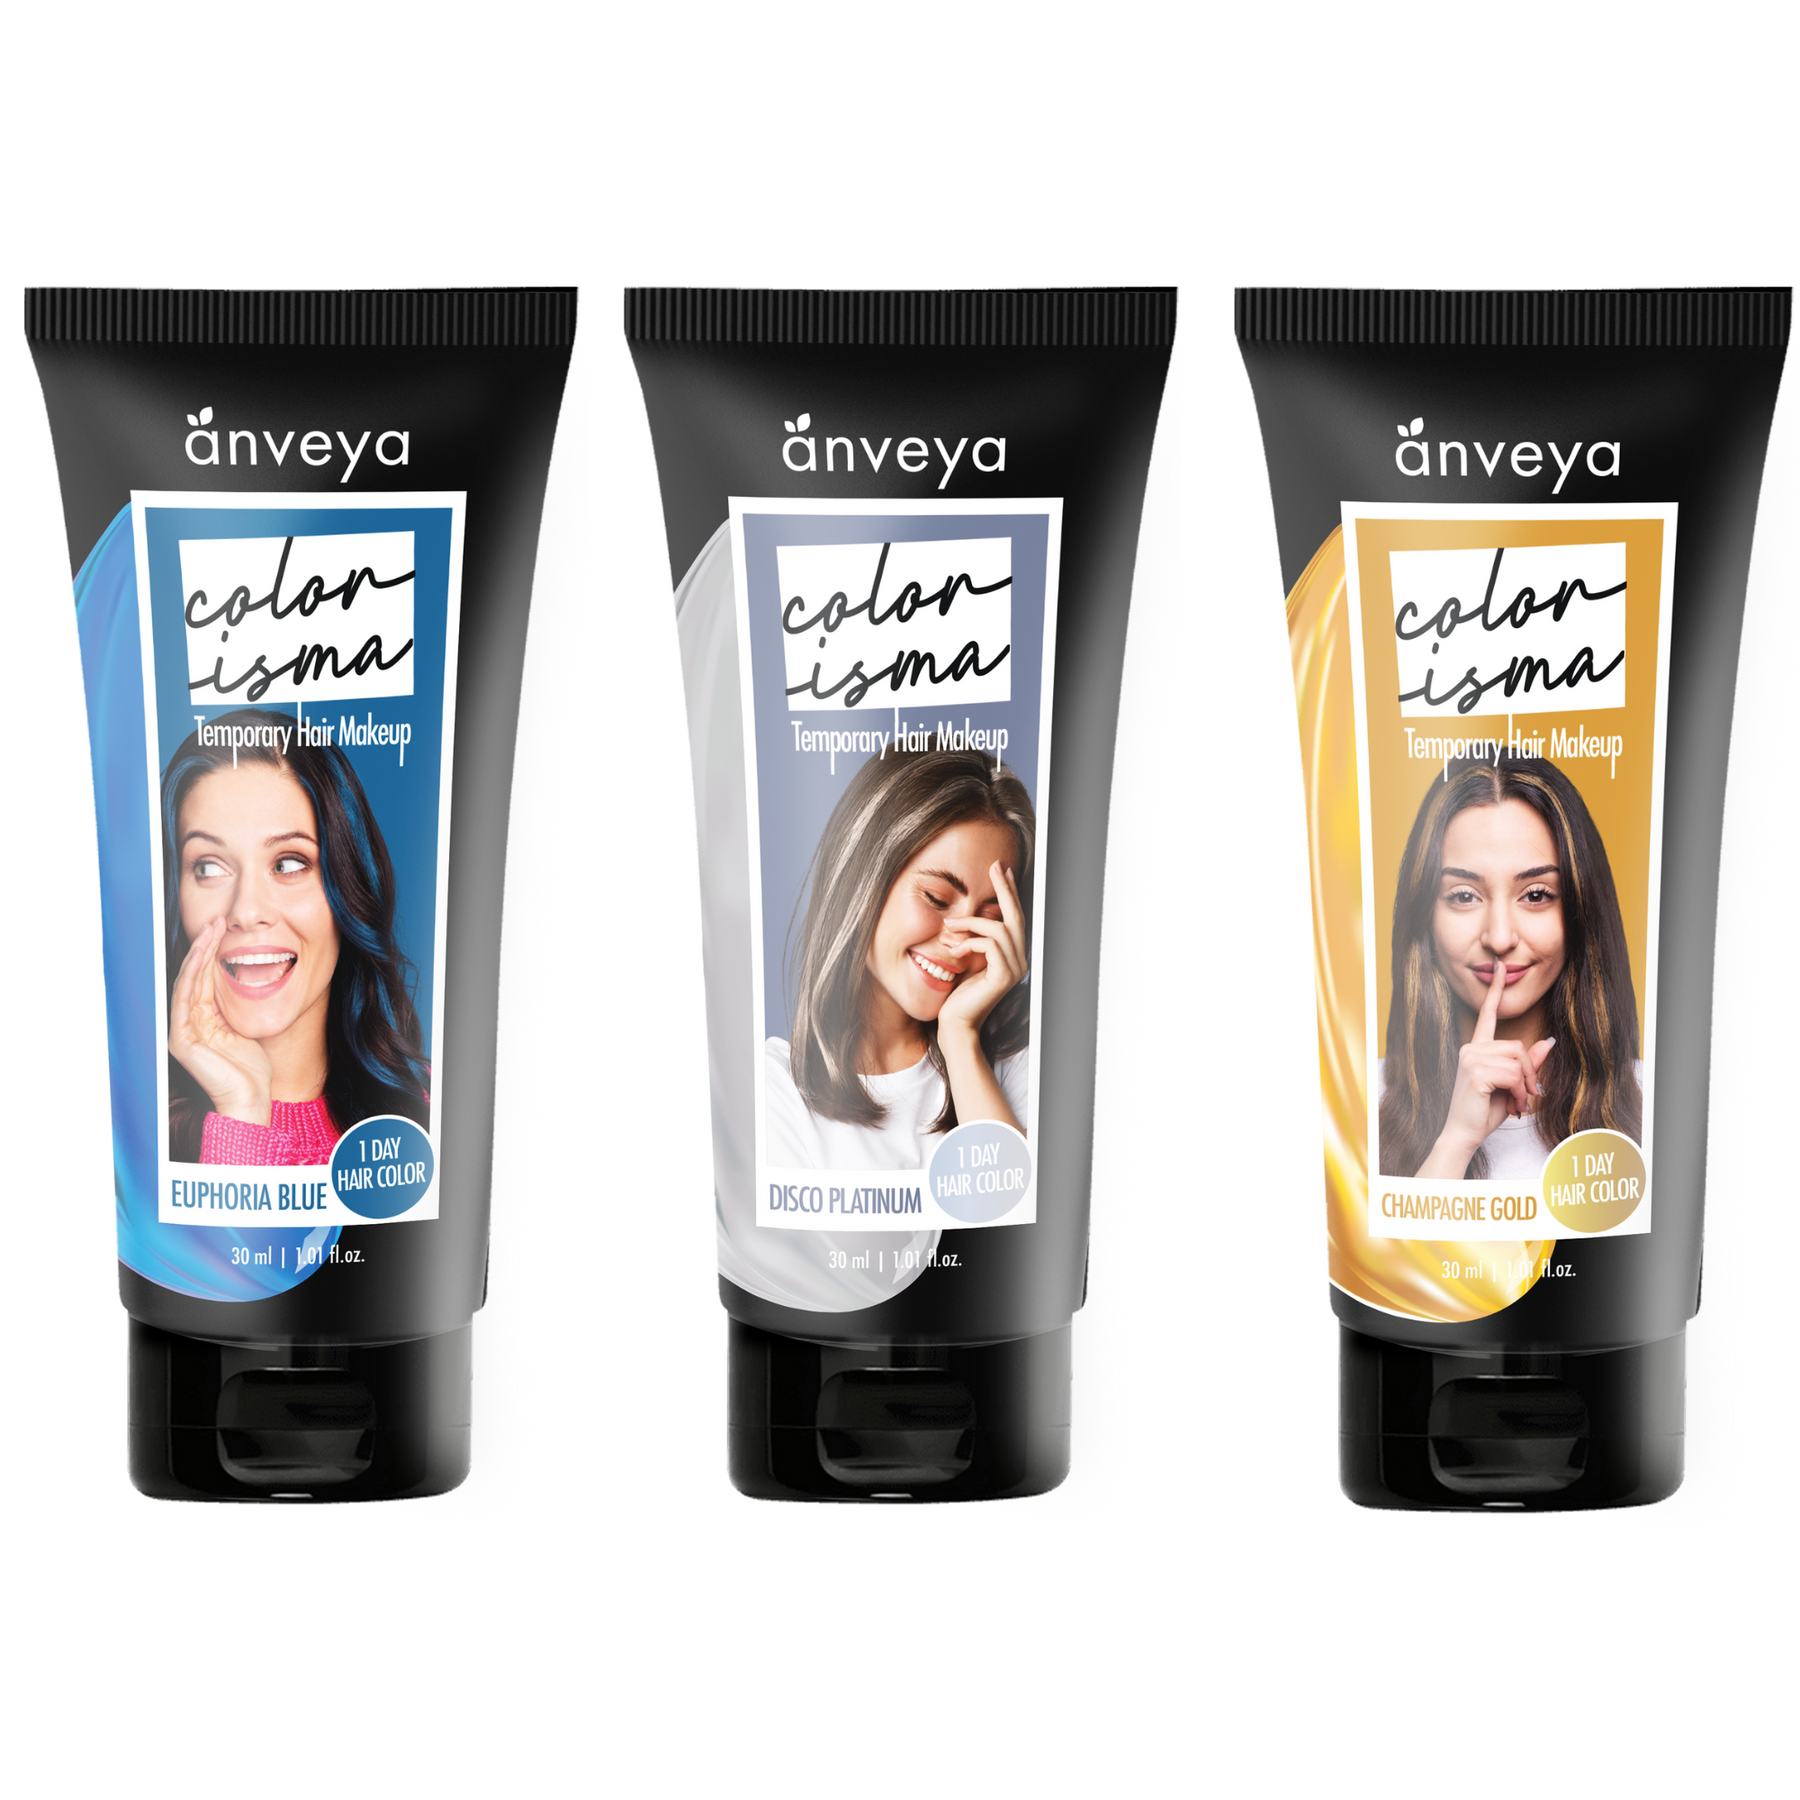 Anveya Colorisma Euphoria Blue, Disco Platinum and Champagne Gold Temporary Hair Color, 30ml each